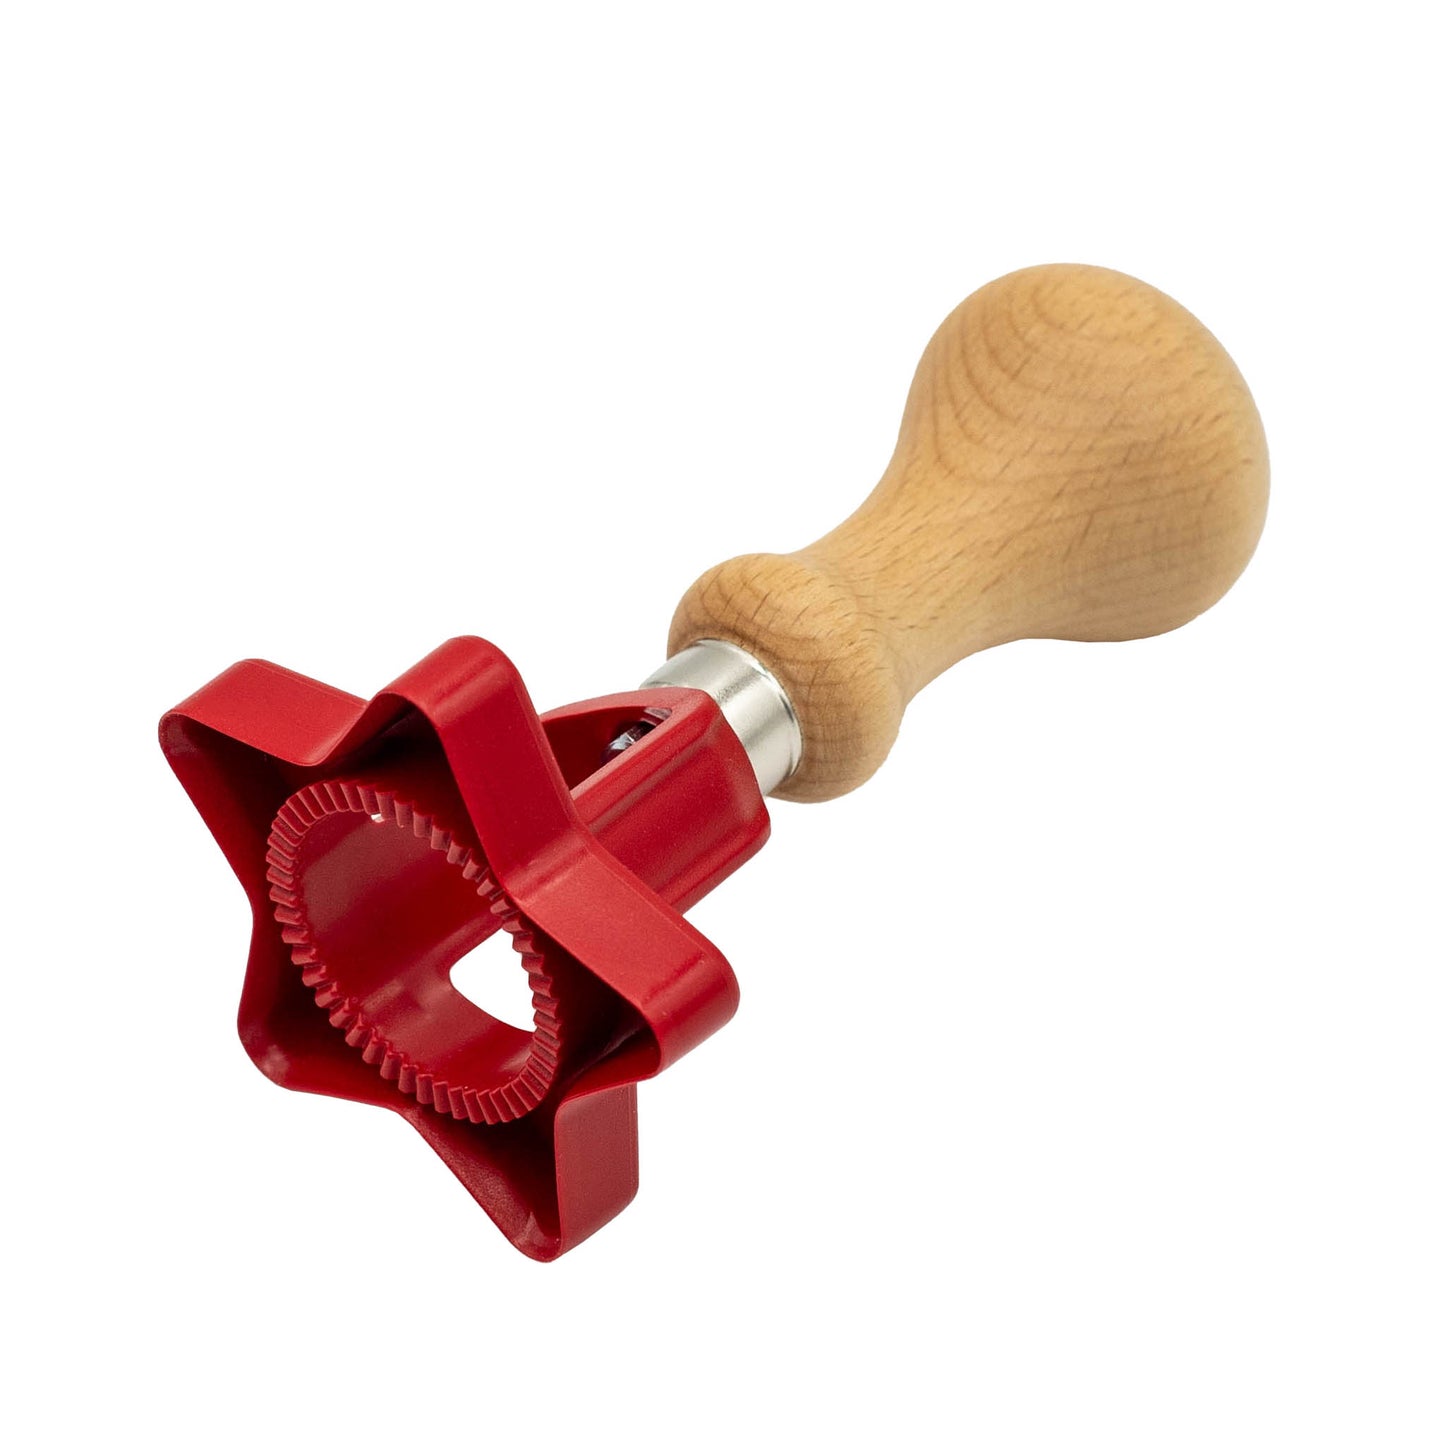 Red plastic star shape biscuit and pastry cutter with wooden handle. 